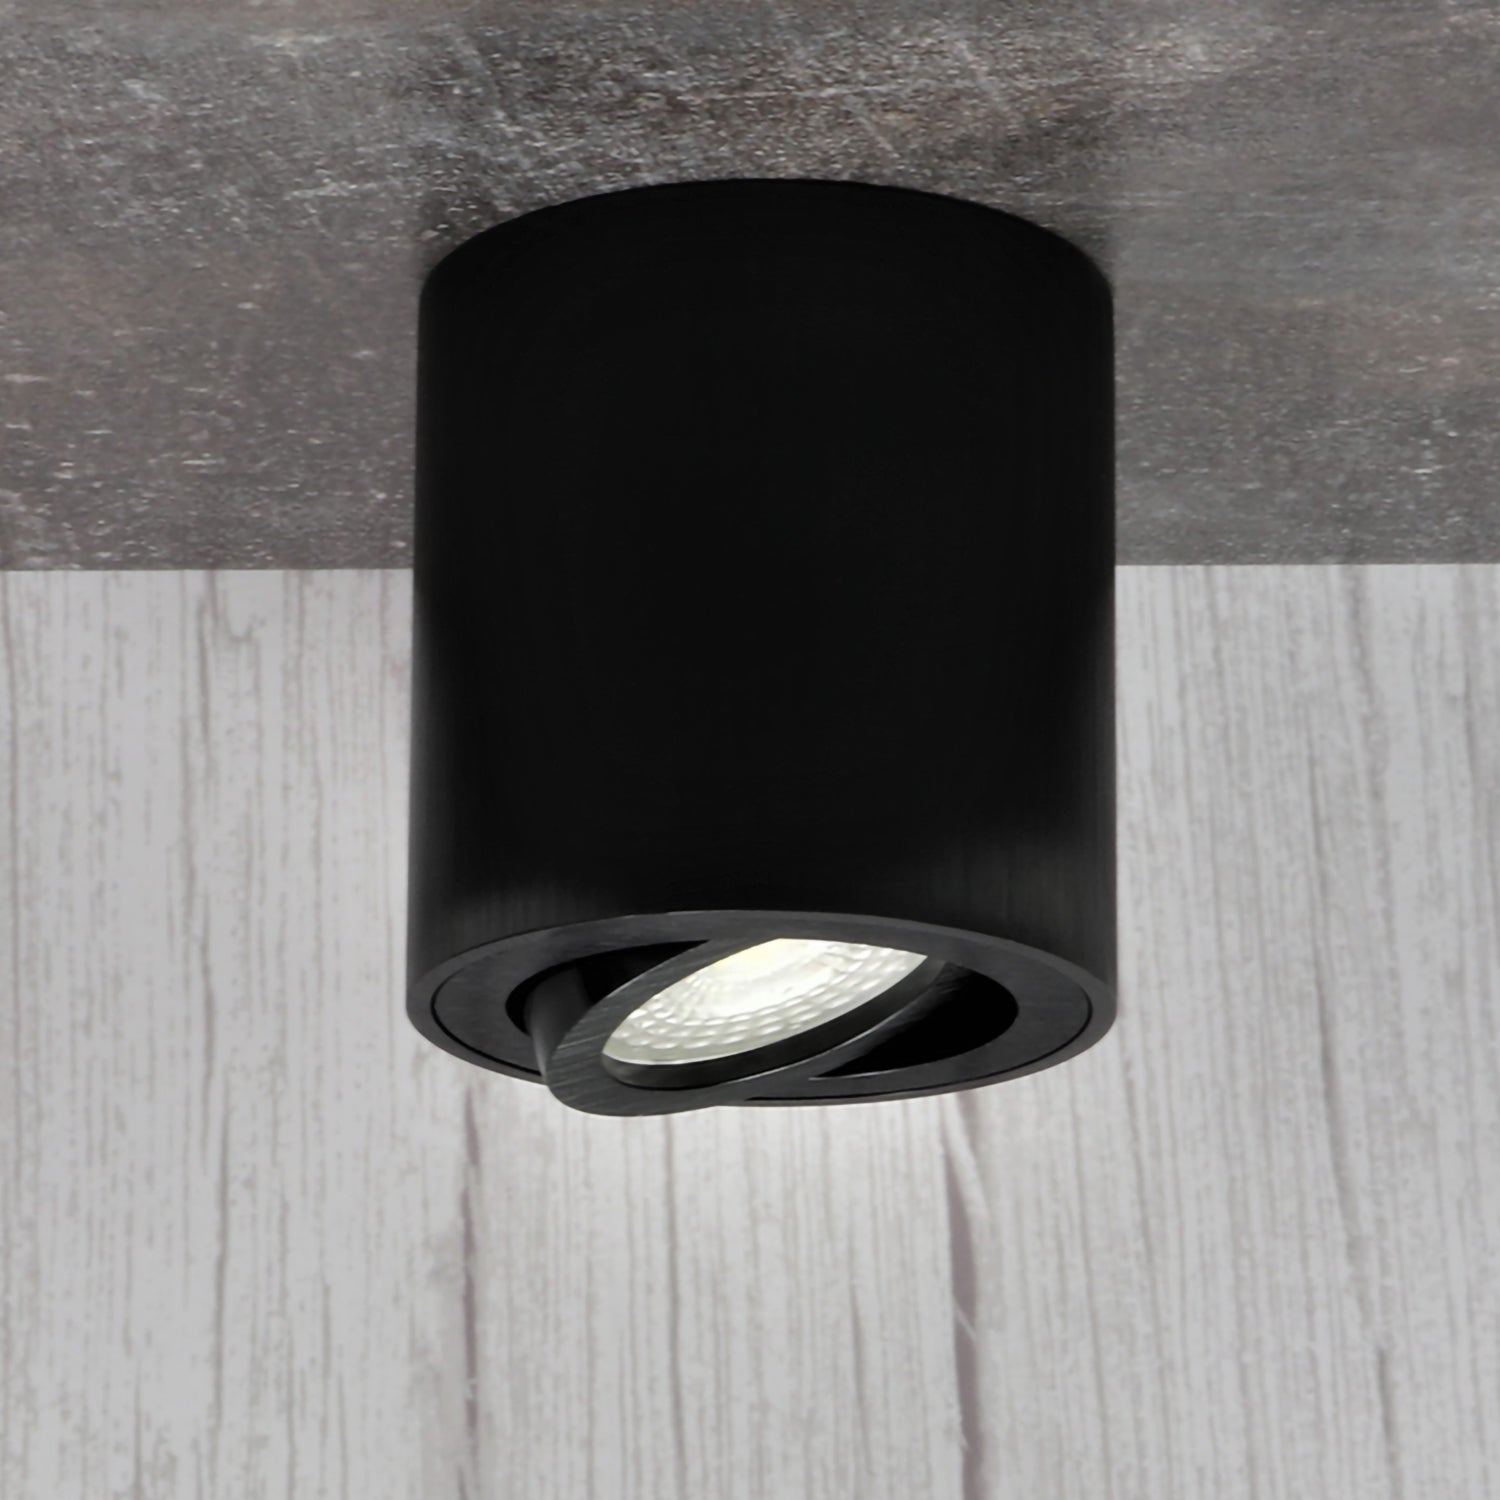 LED surface-mounted spotlight ceiling light Round – Dimmable GU10 230V Black Milano 6.2W novoom Surface-mounted light